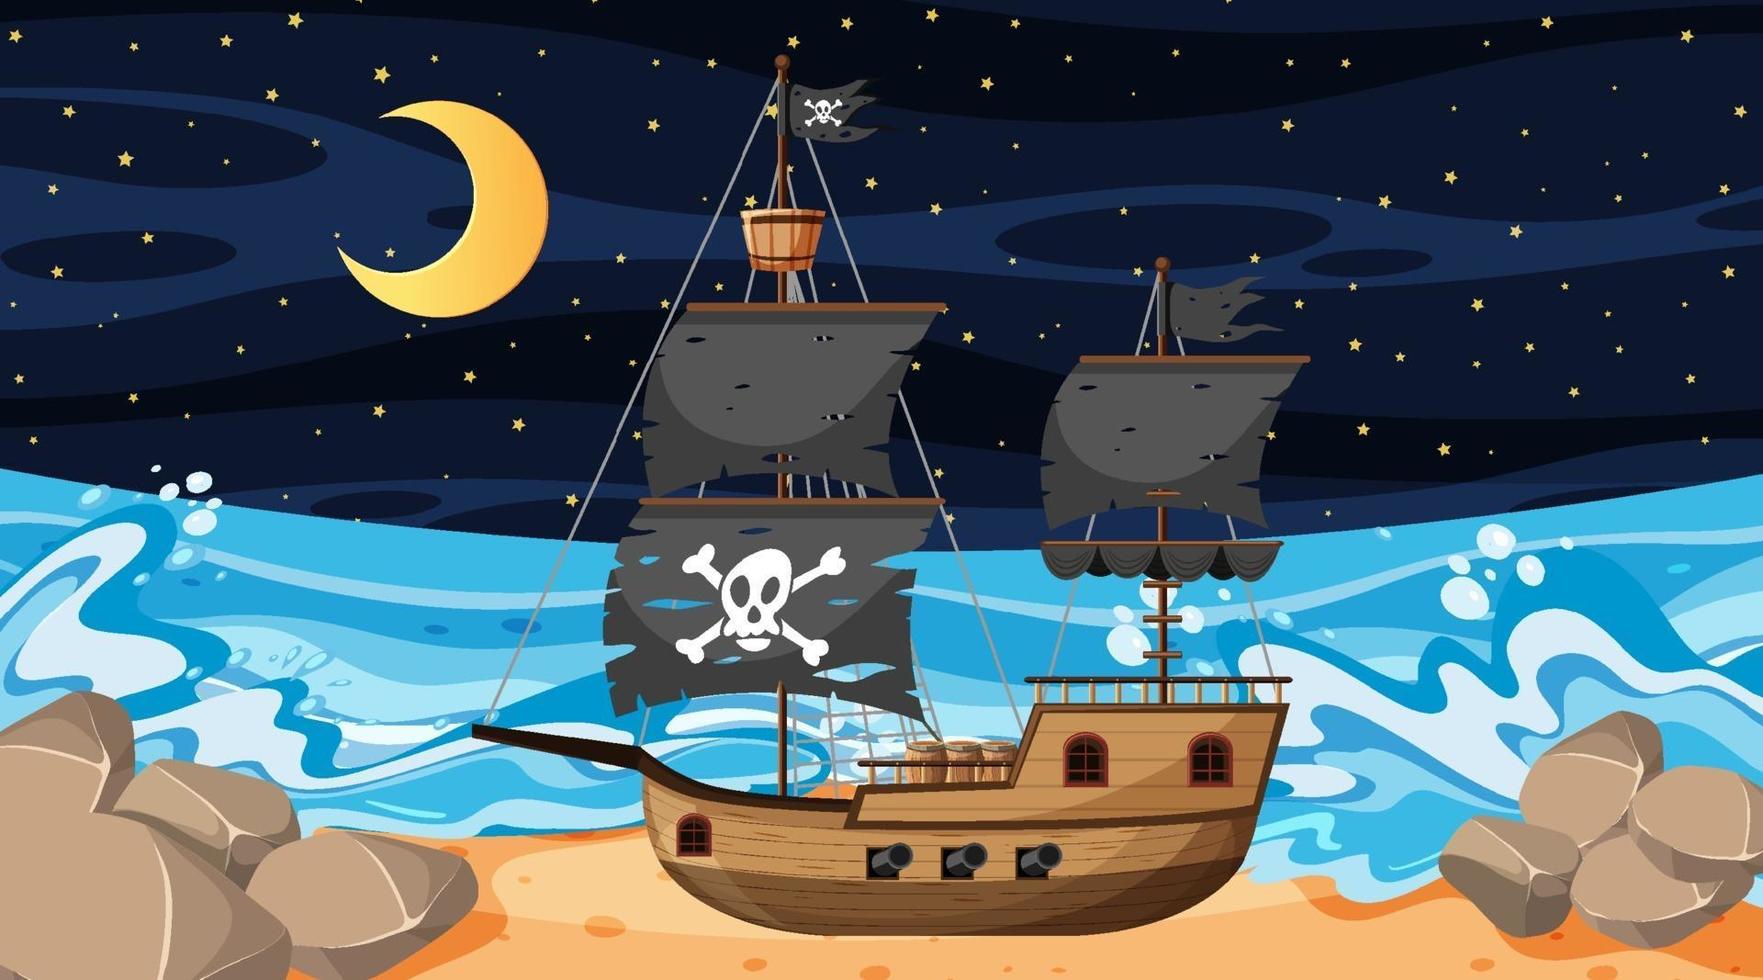 Ocean with Pirate ship at night scene in cartoon style vector